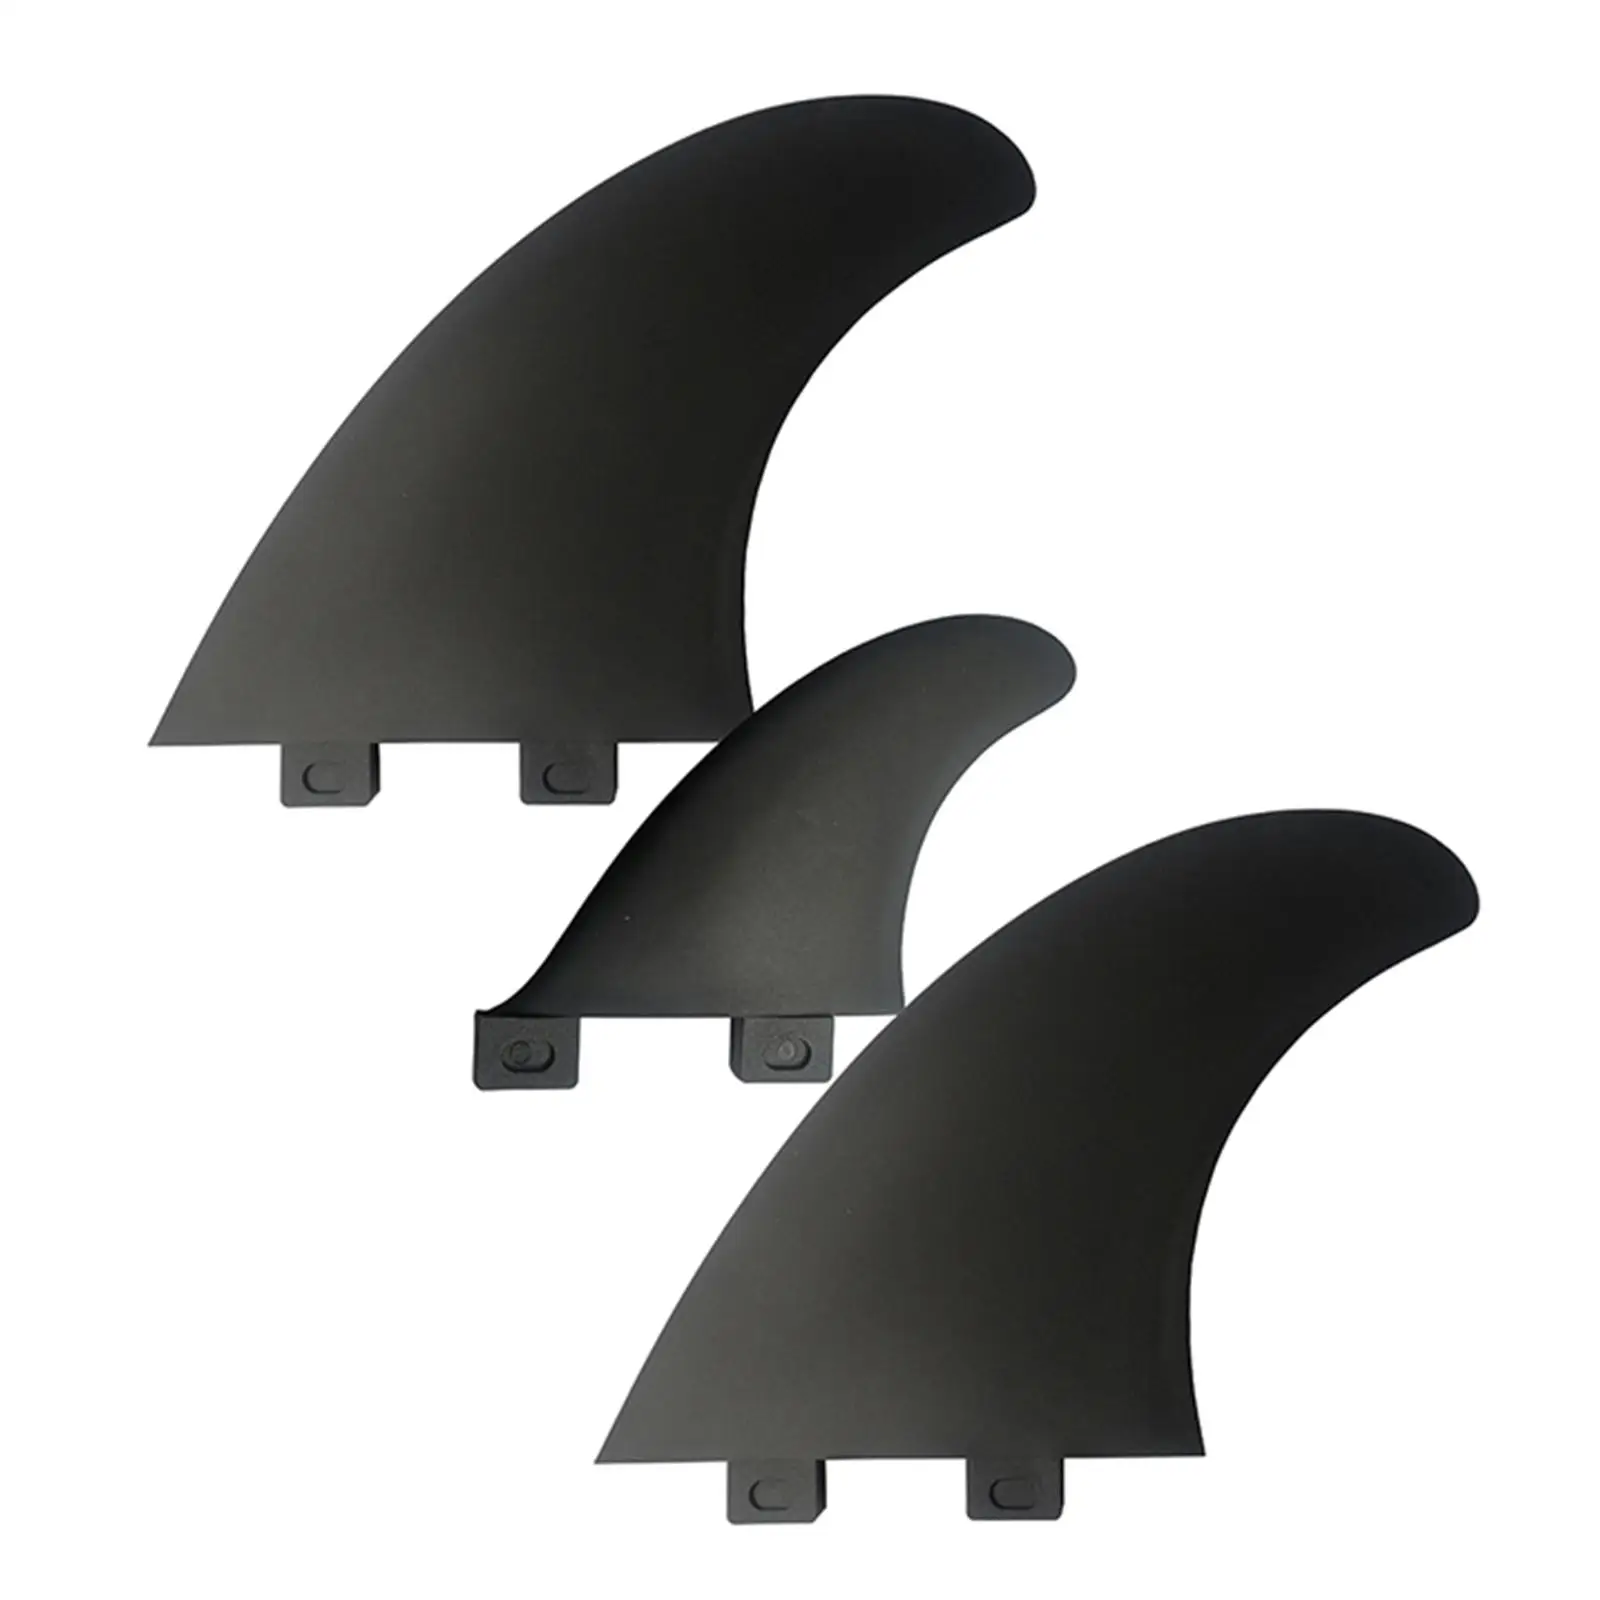 3x Surfboard Fins Surfing Fin Quick Release Replacement Durable for Boat Paddleboard Water Sports Longboard Accessory